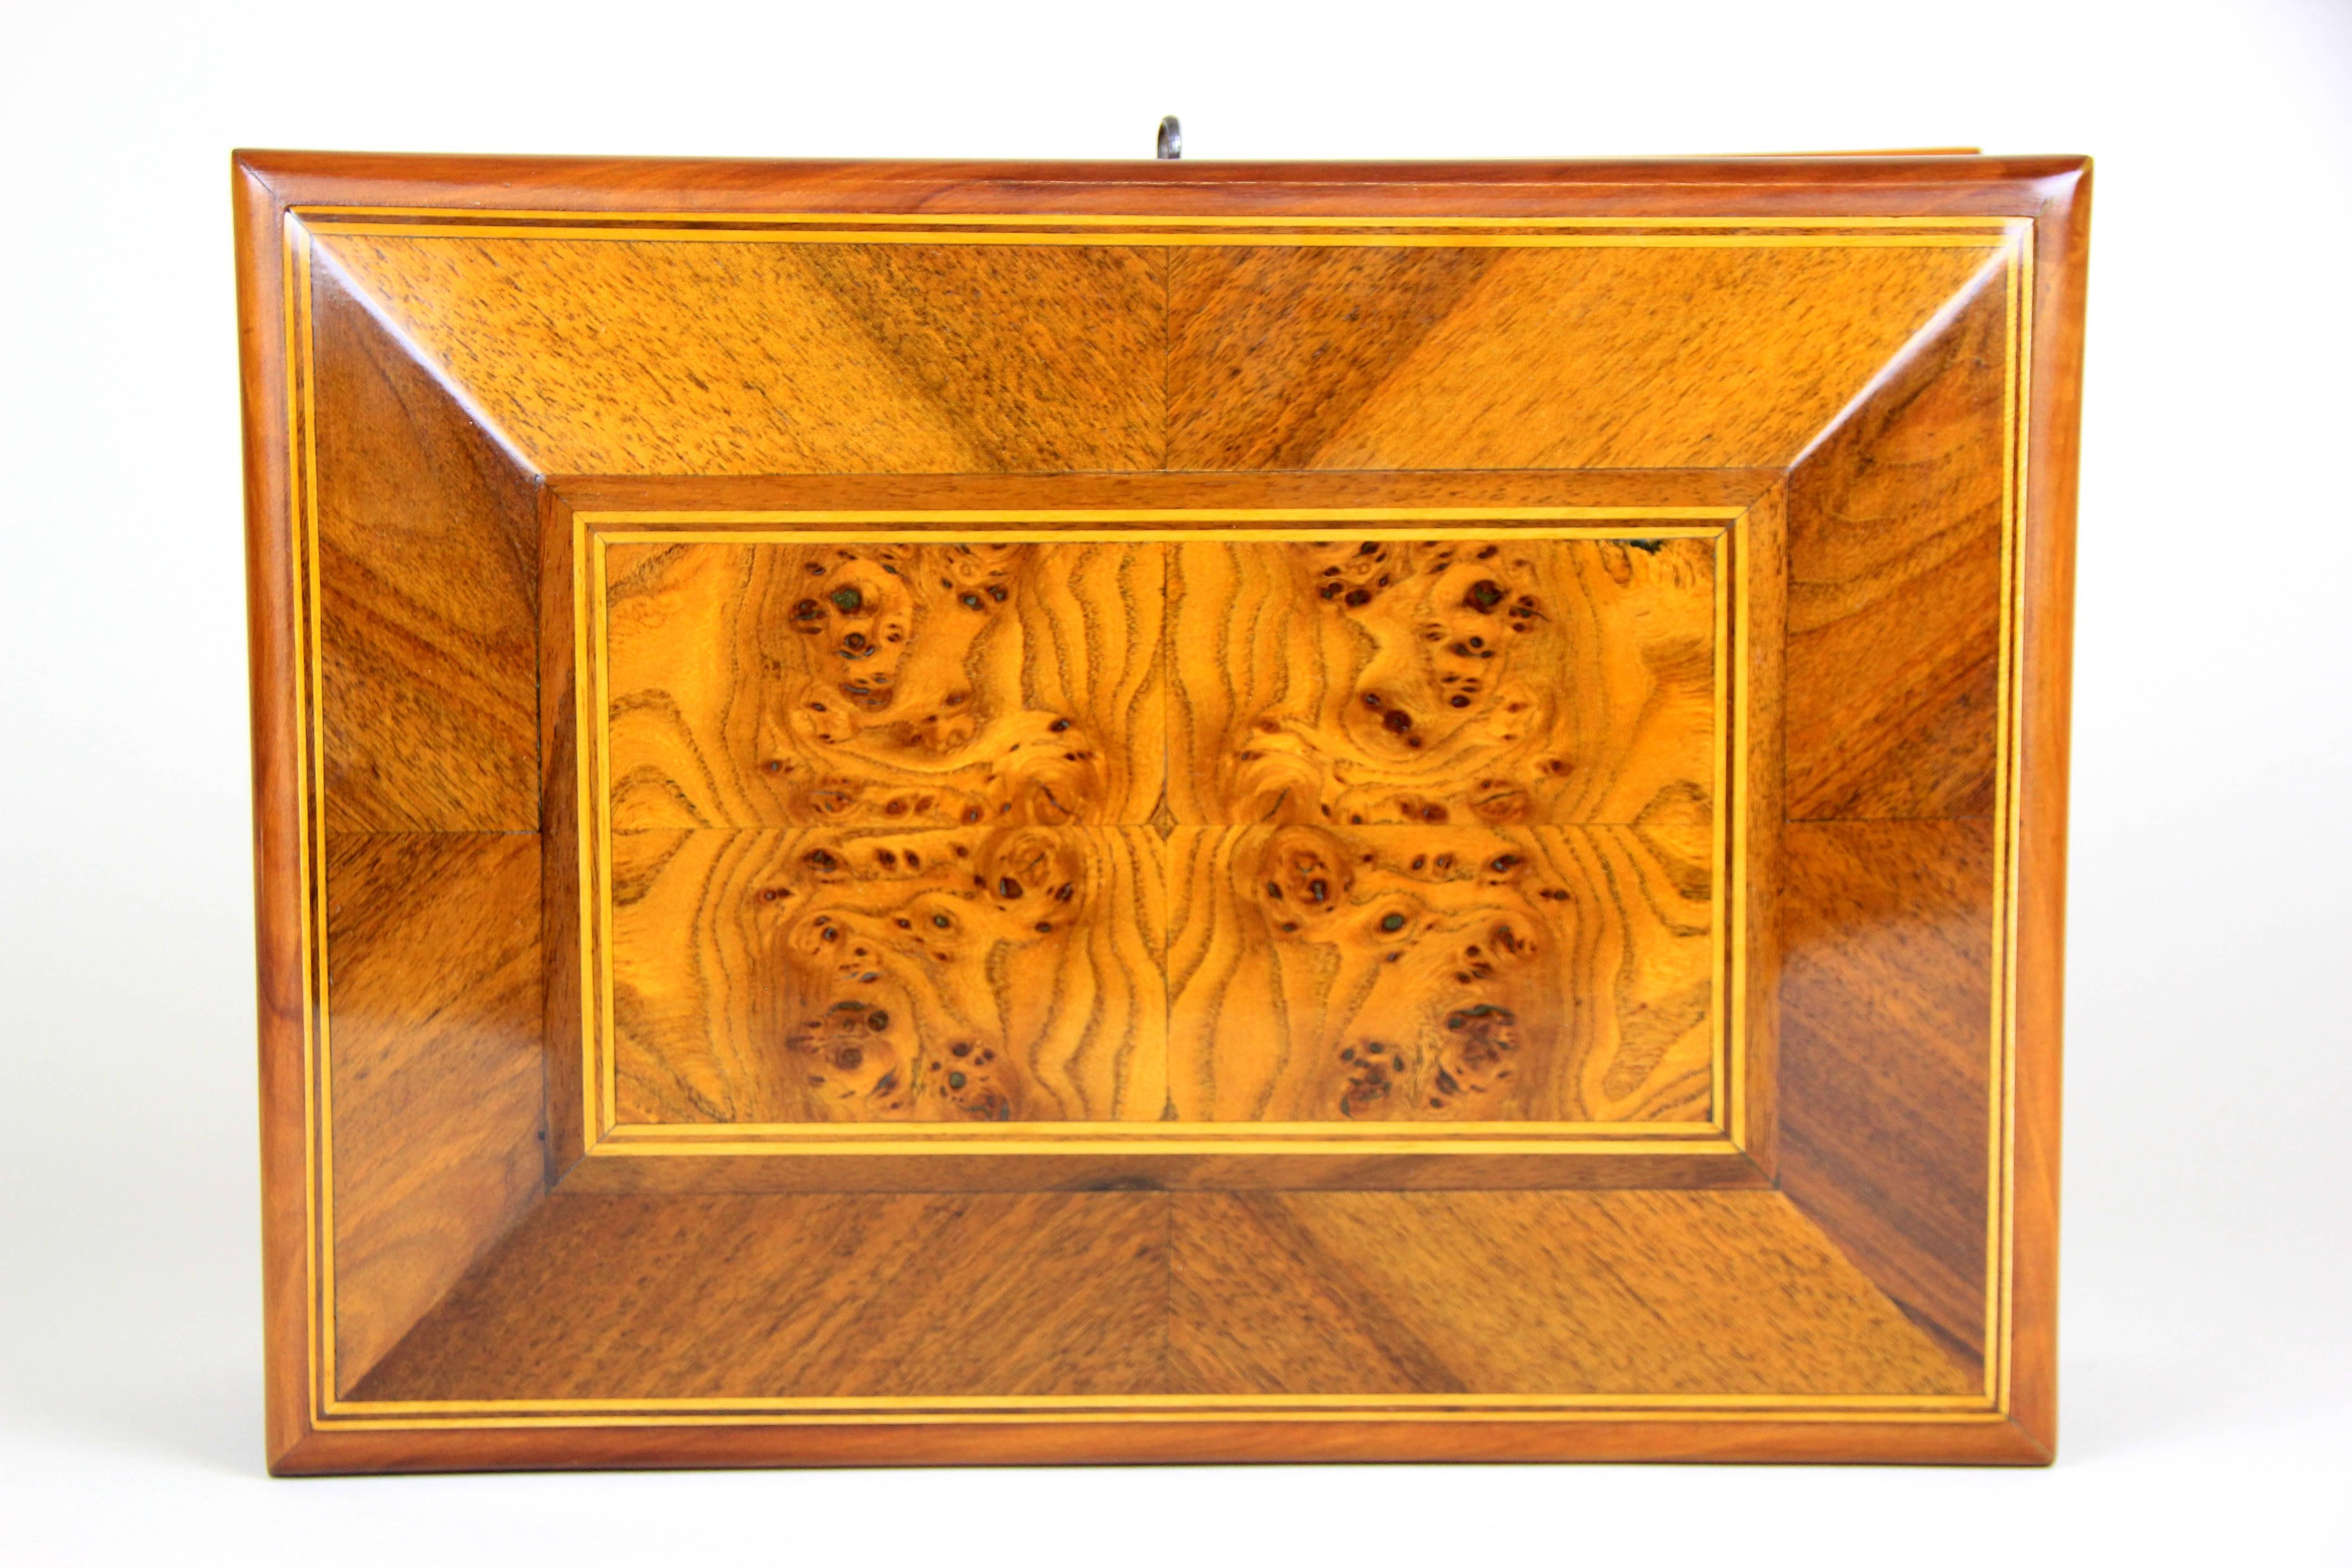 Another brand-new item in our collection is this fine wooden Biedermeier Box from the 2nd Biedermeier era, circa 1870, Austria.
The shaping reminds of a little treasure chest and it truly is - veneered with gorgeous nut wood in a extravagant way